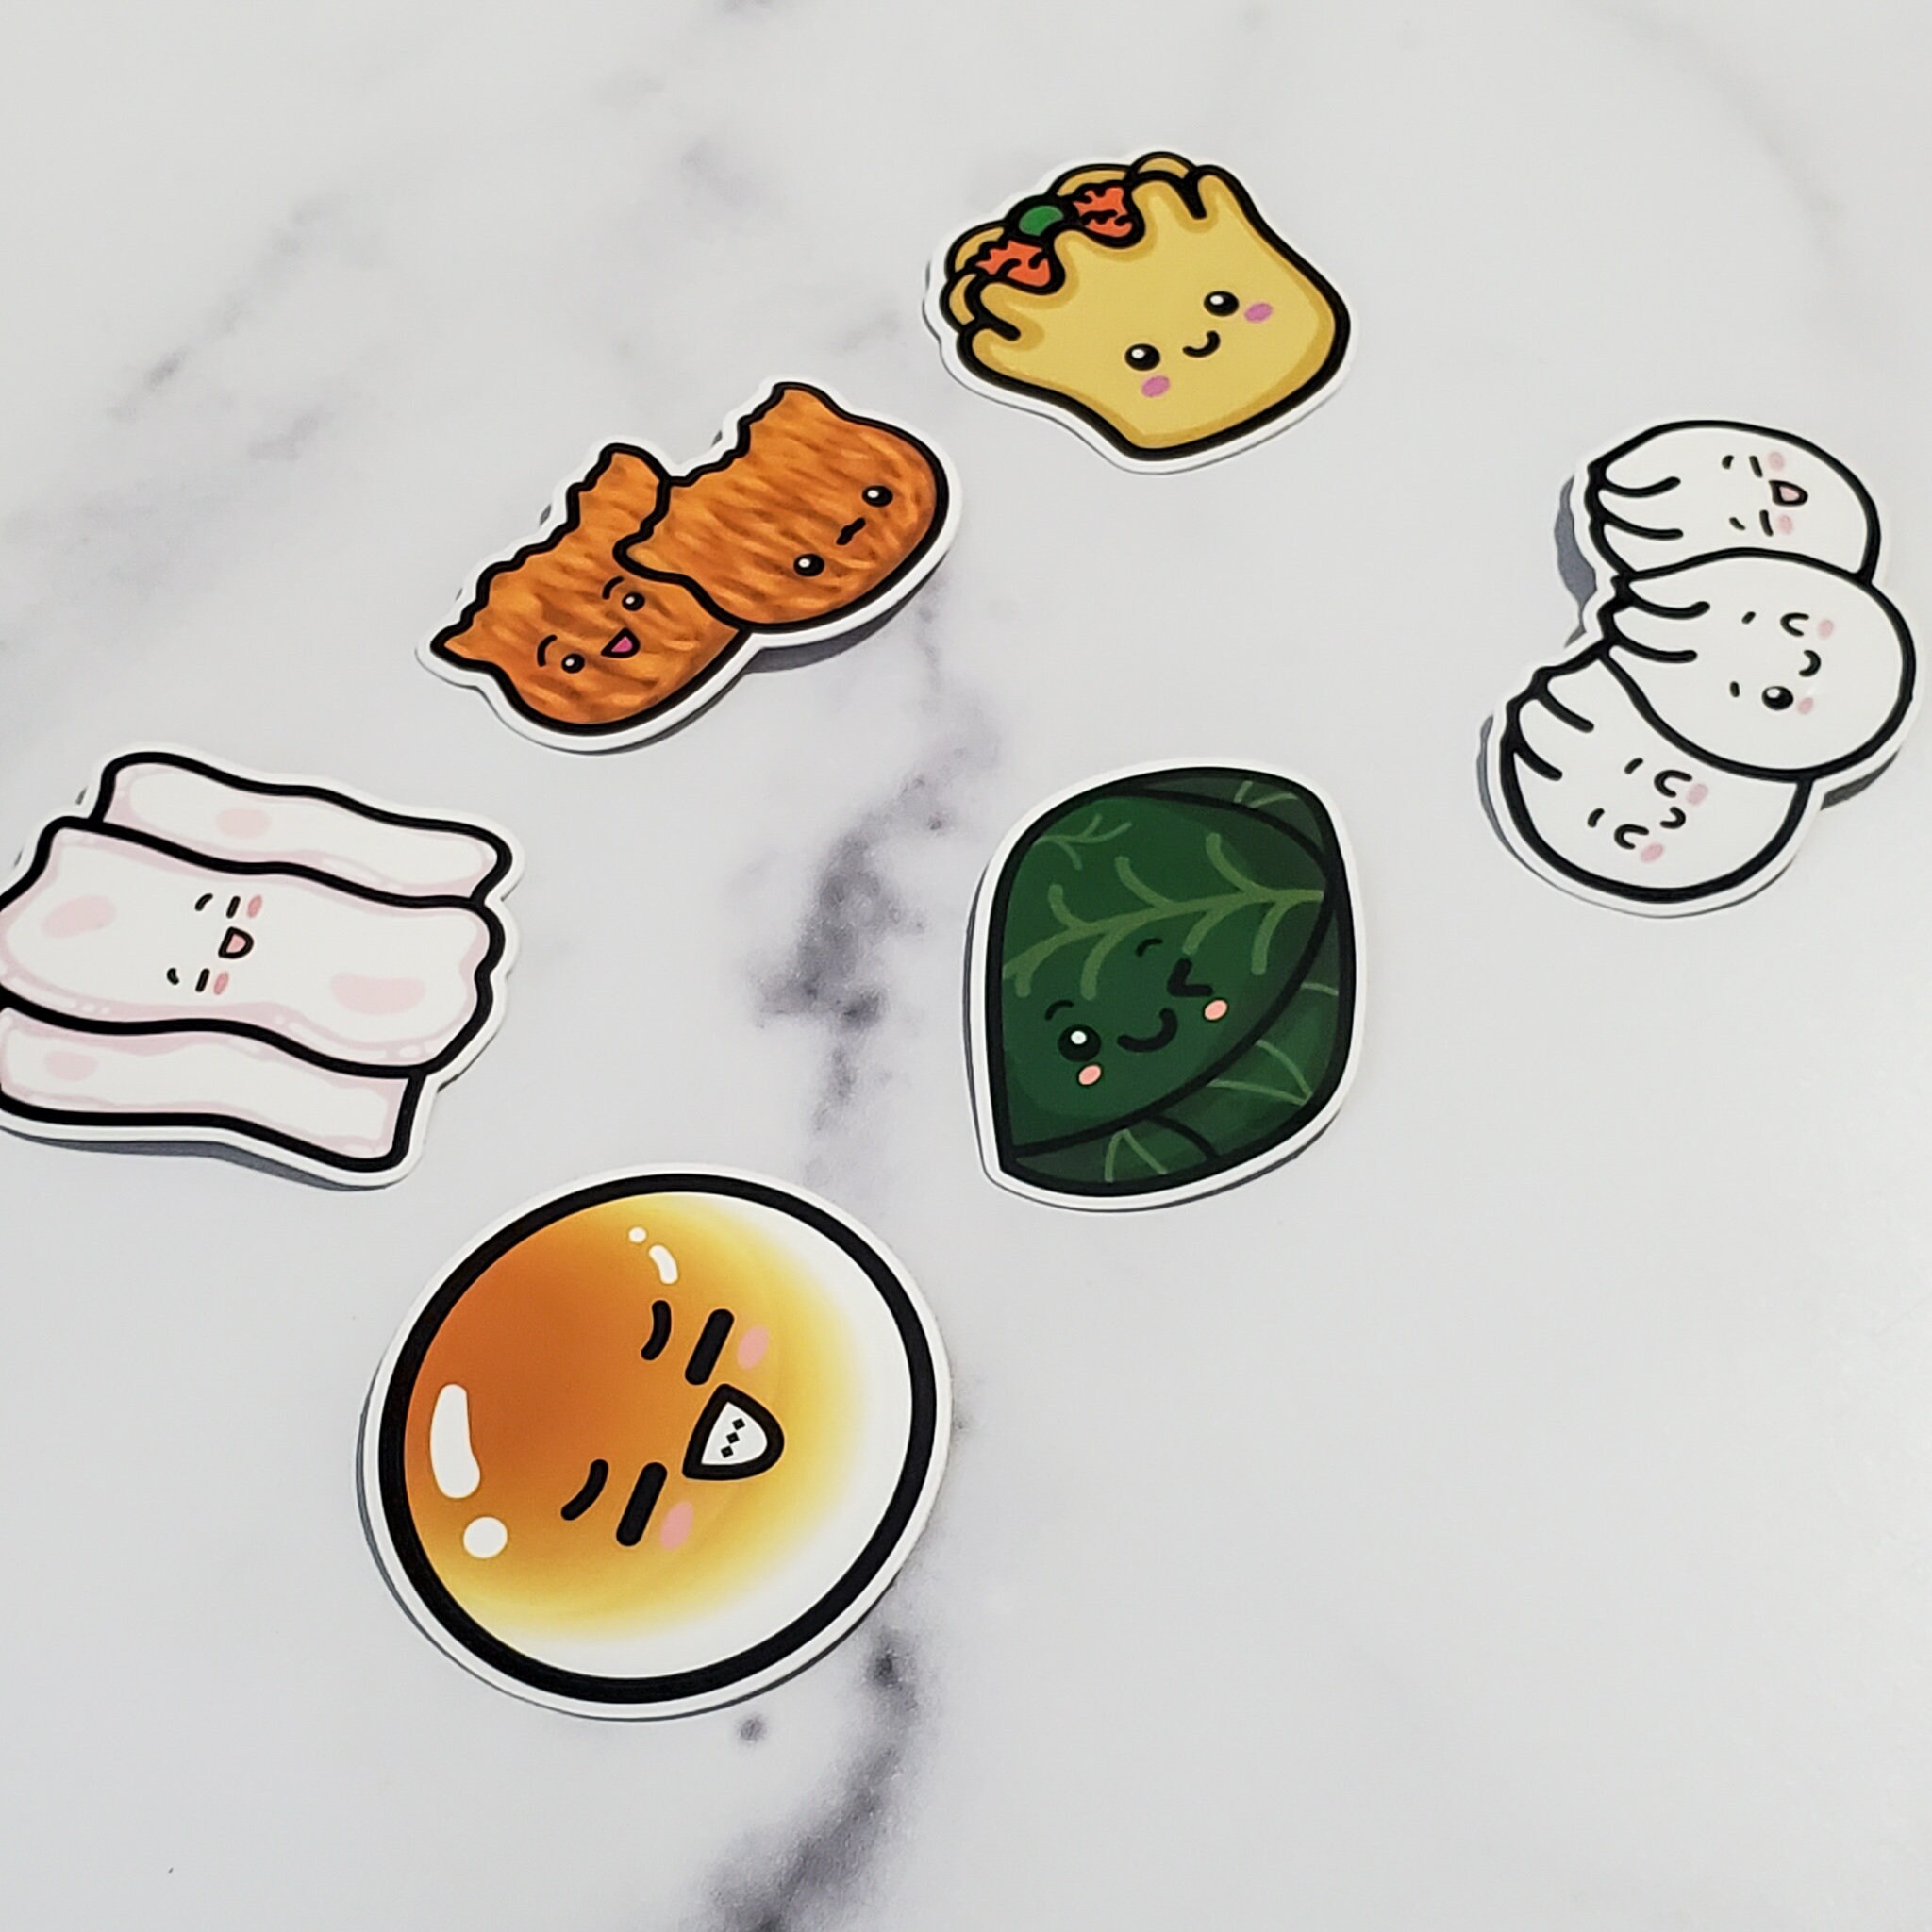 Dim Sum Sticker Pack Set A 6 Piece Dumplings Pastry Cantonese Chinese Brunch Lunch Food Foodie Asian Food Kawaii Cute Sticker Stationery